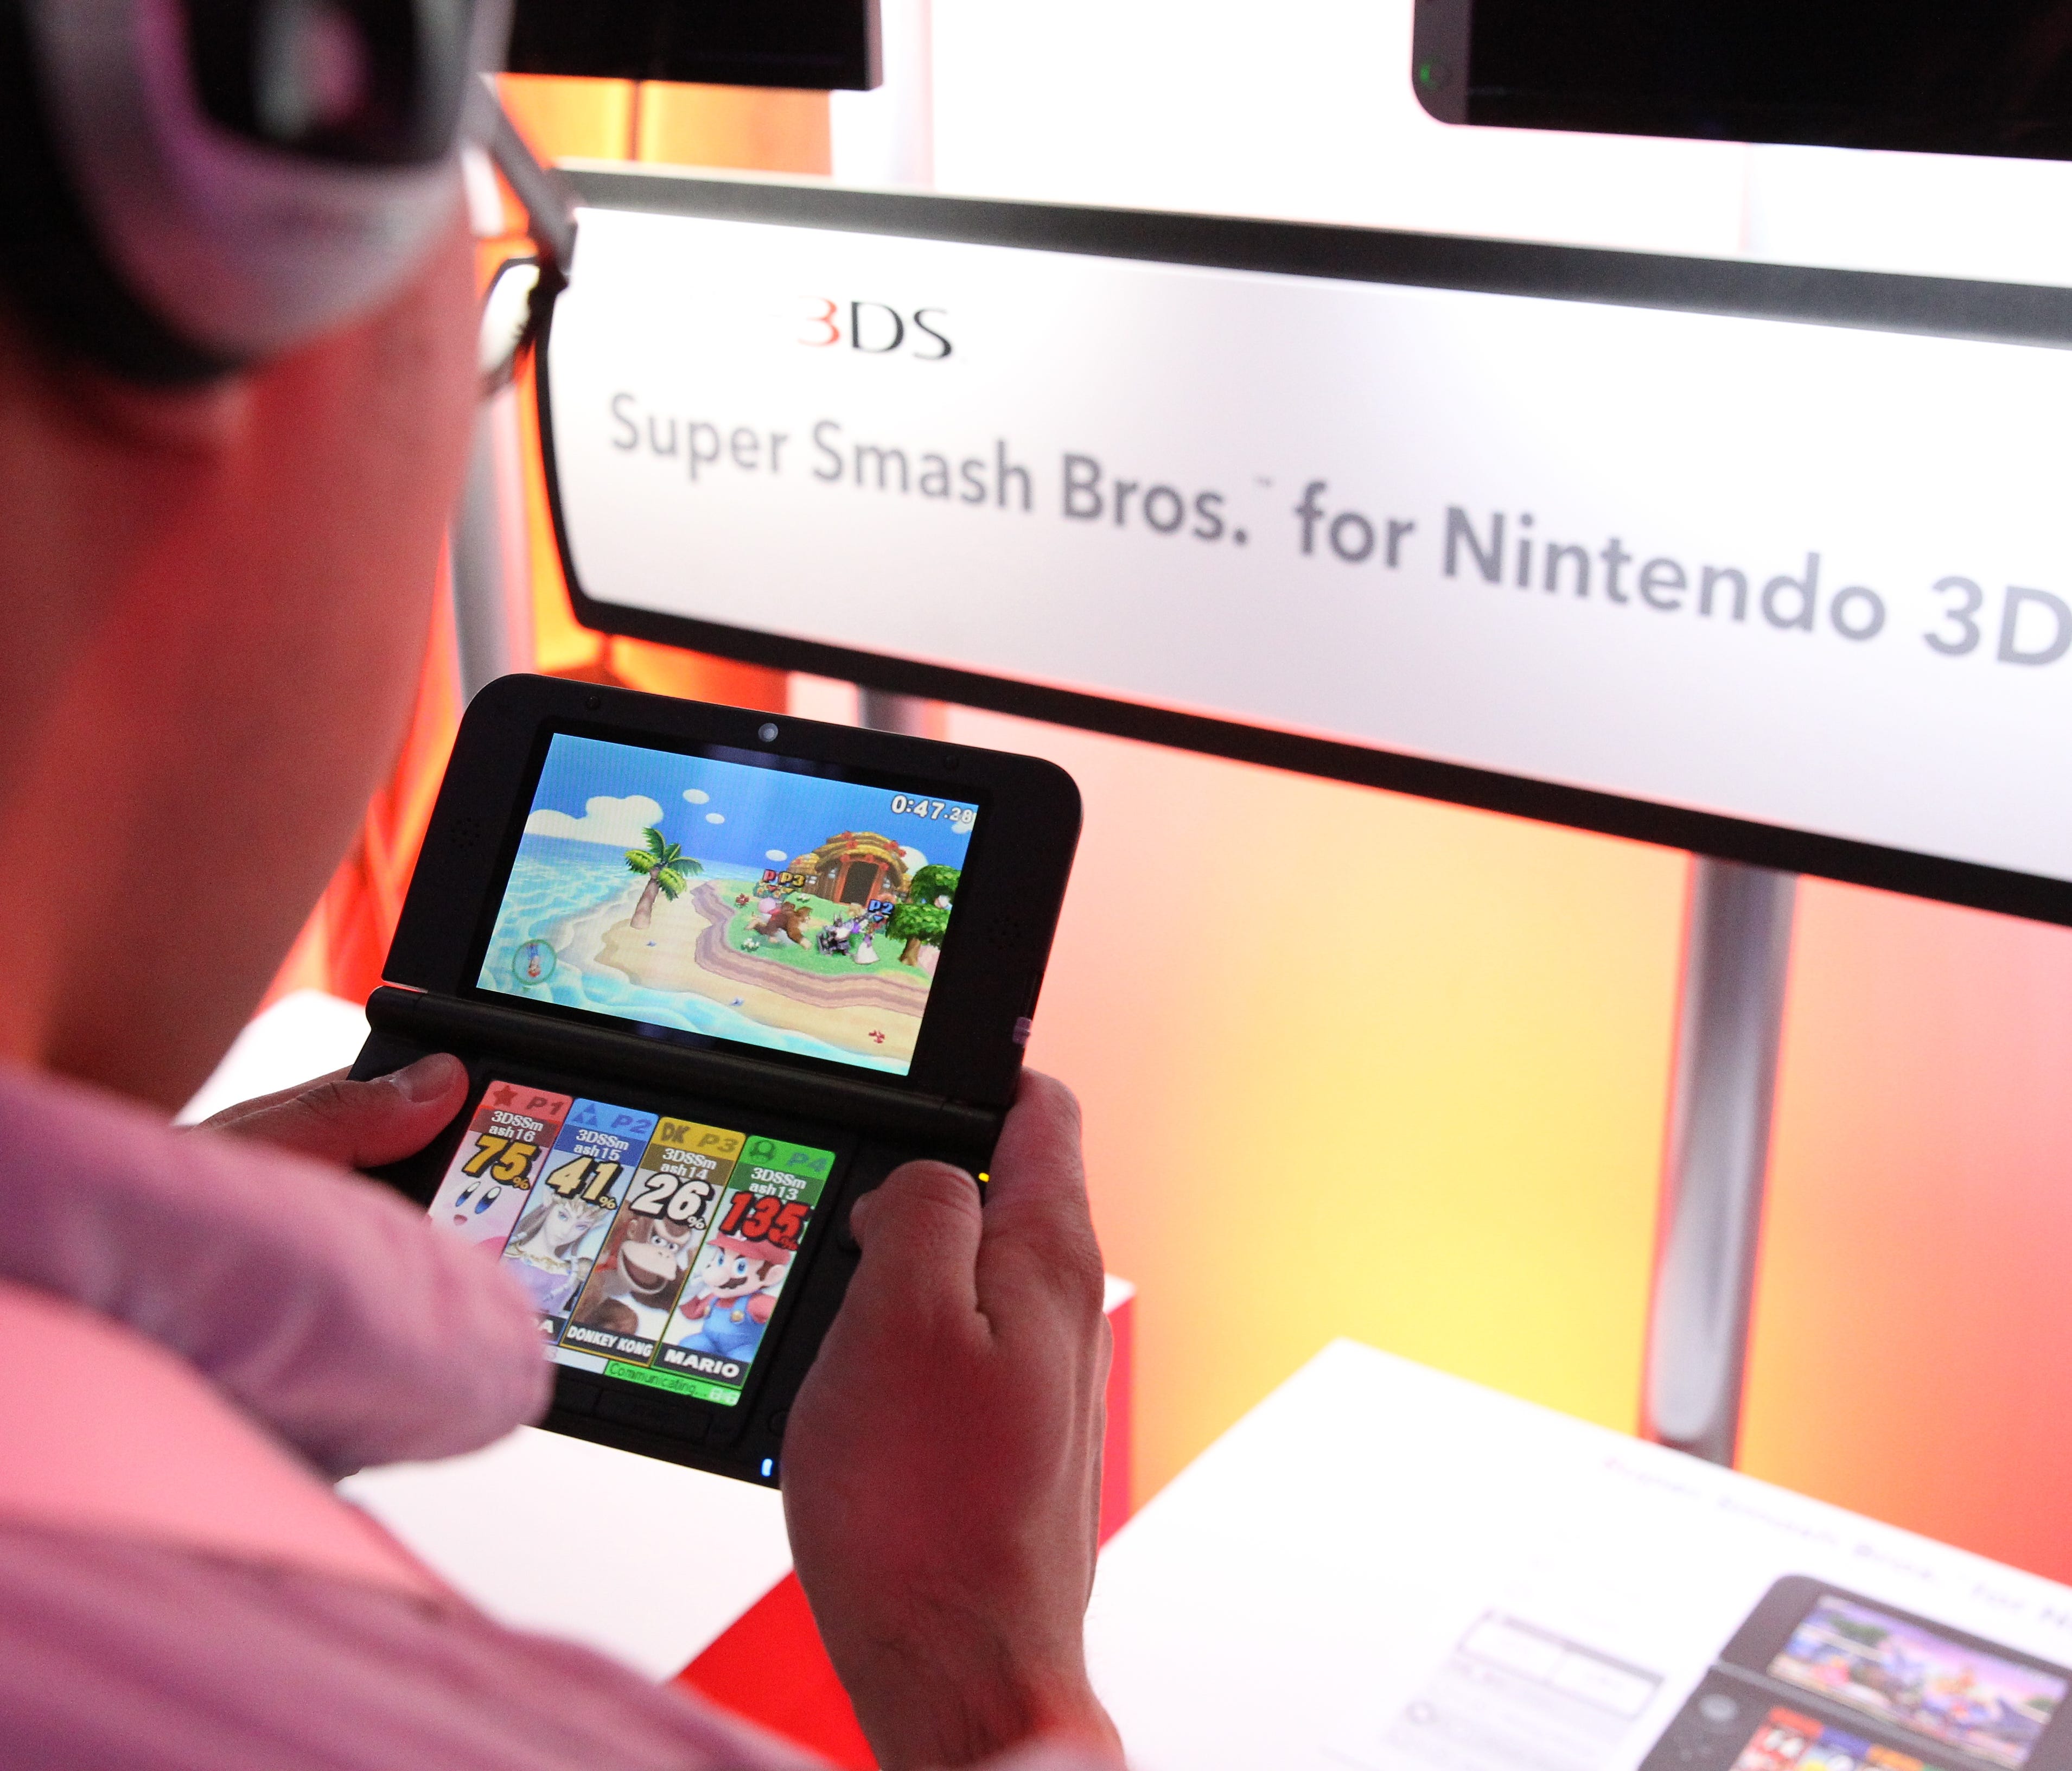 Attendees playing Super Bash Bros on the Nintendo 3DS during the Electronic Entertainment Expo in Los Angeles in 2014.